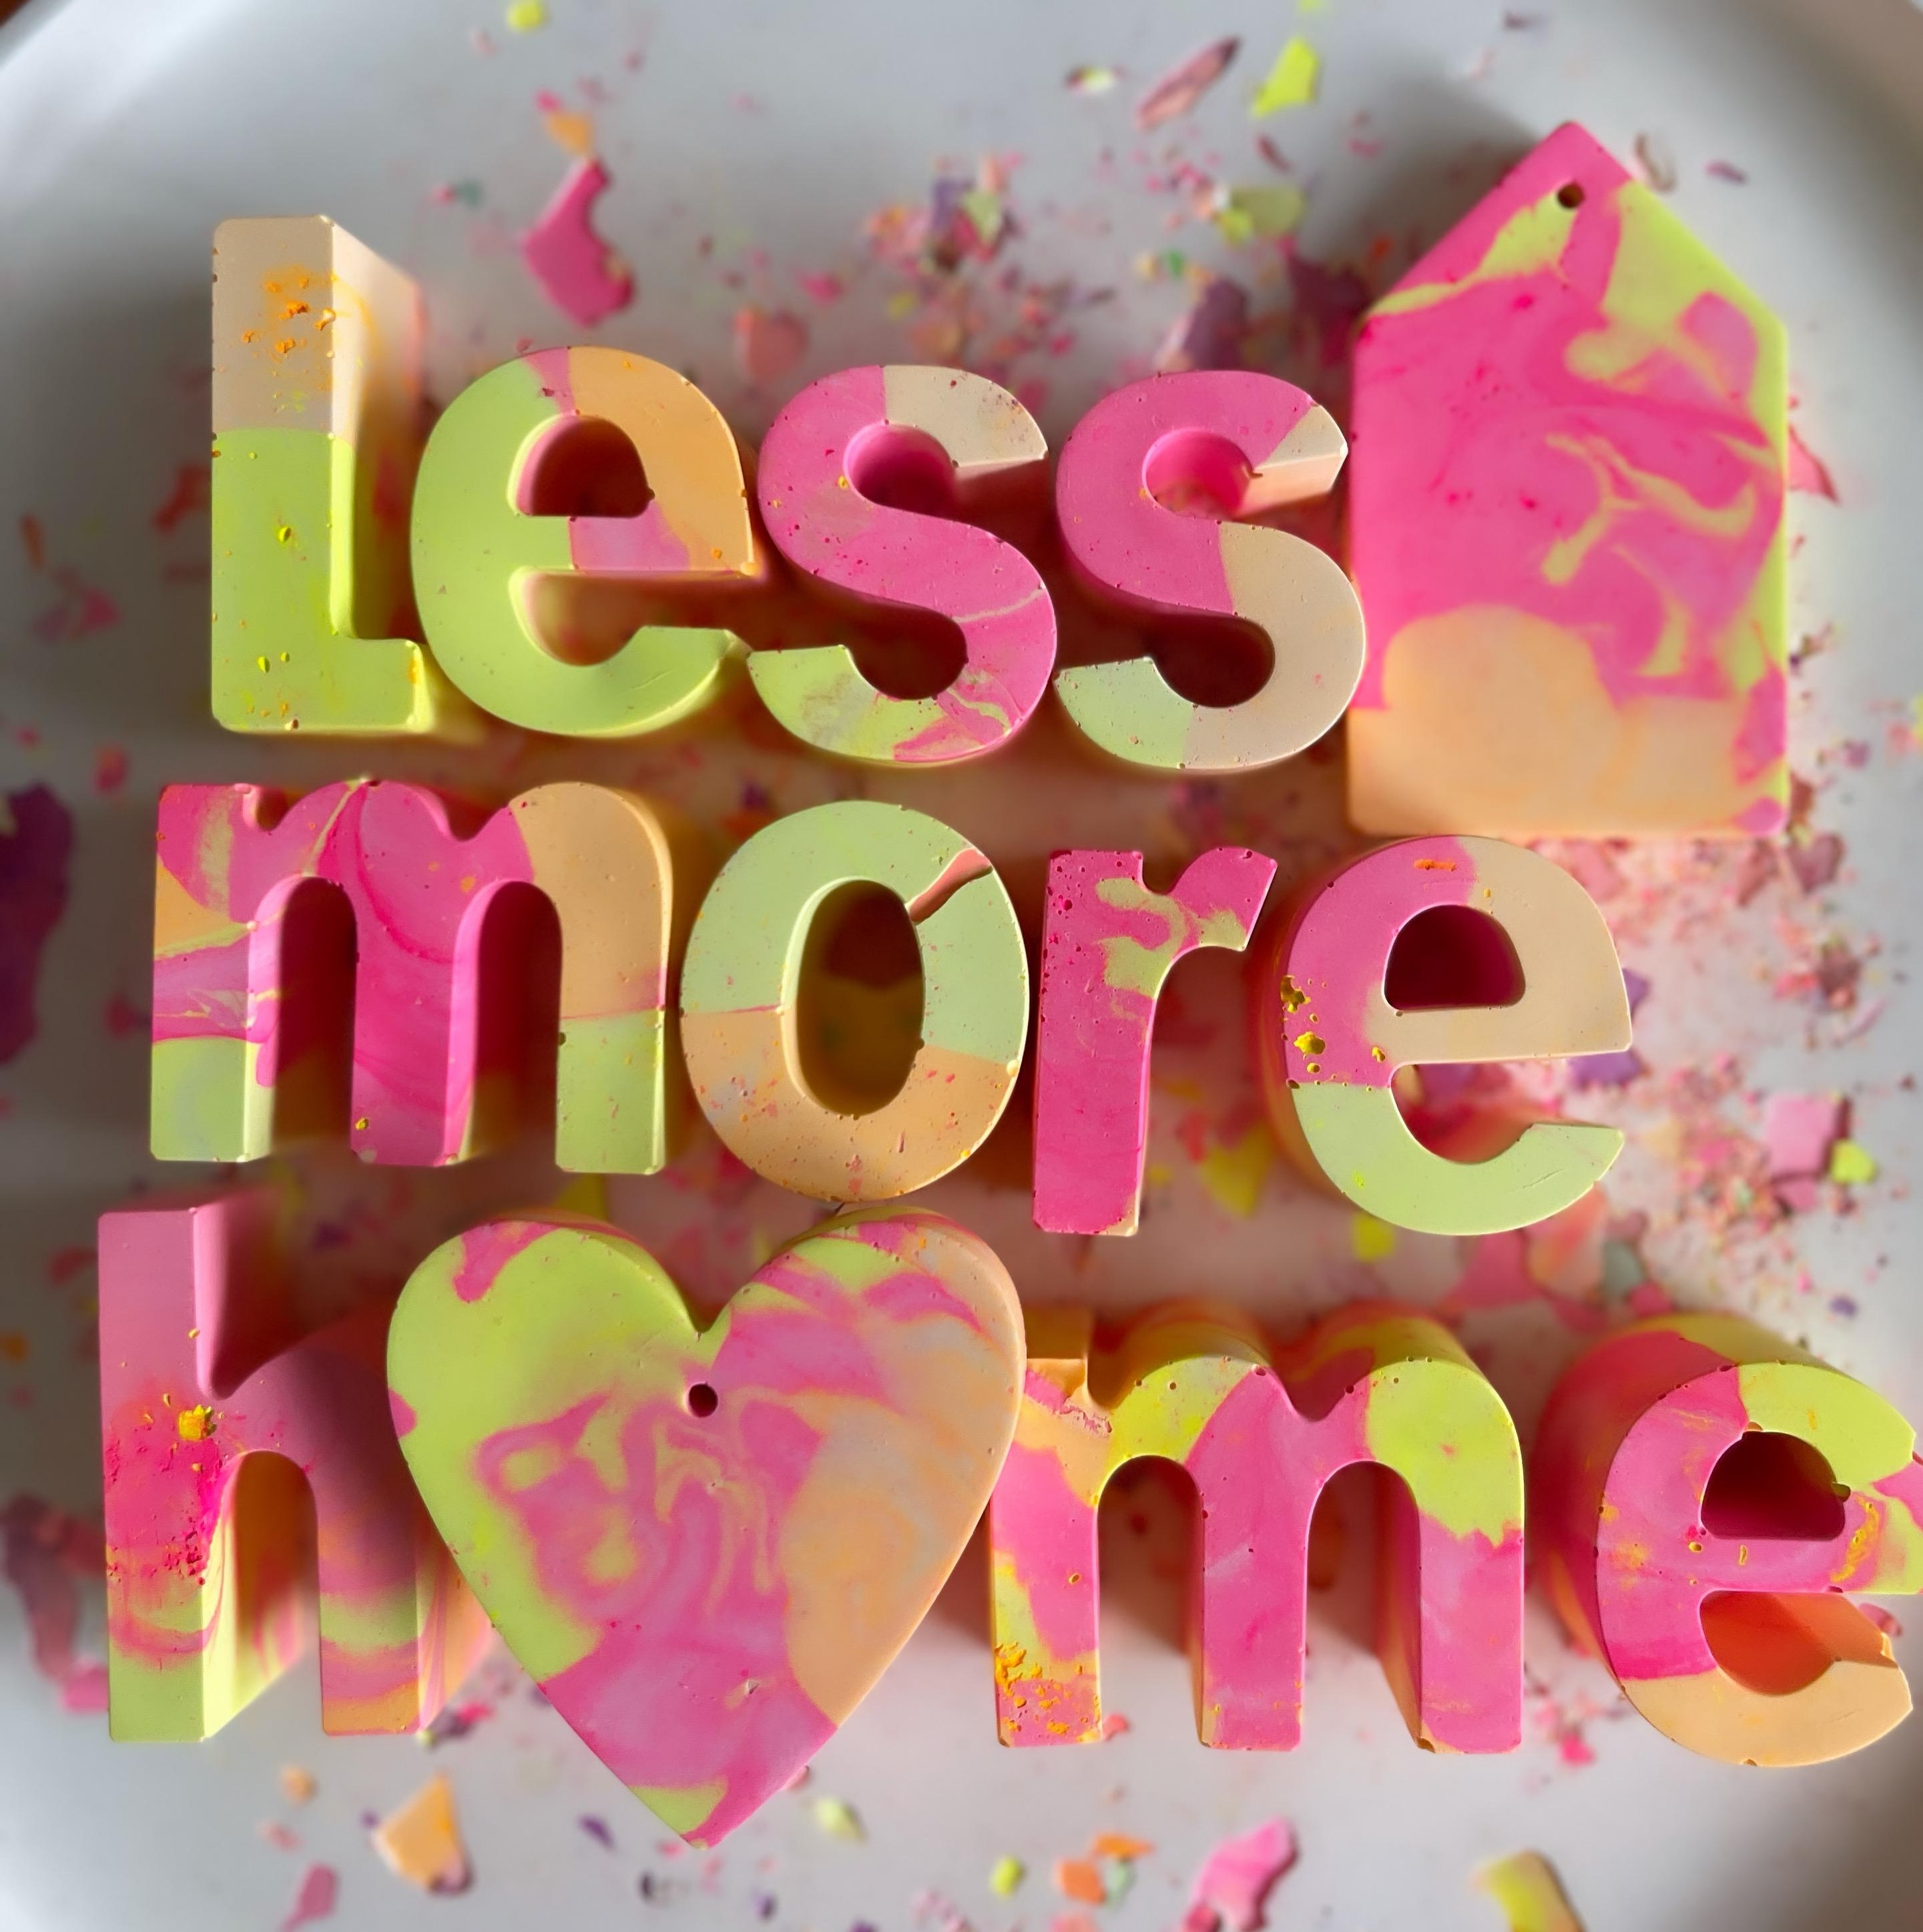 Less #house, more #home
#cheers2colour